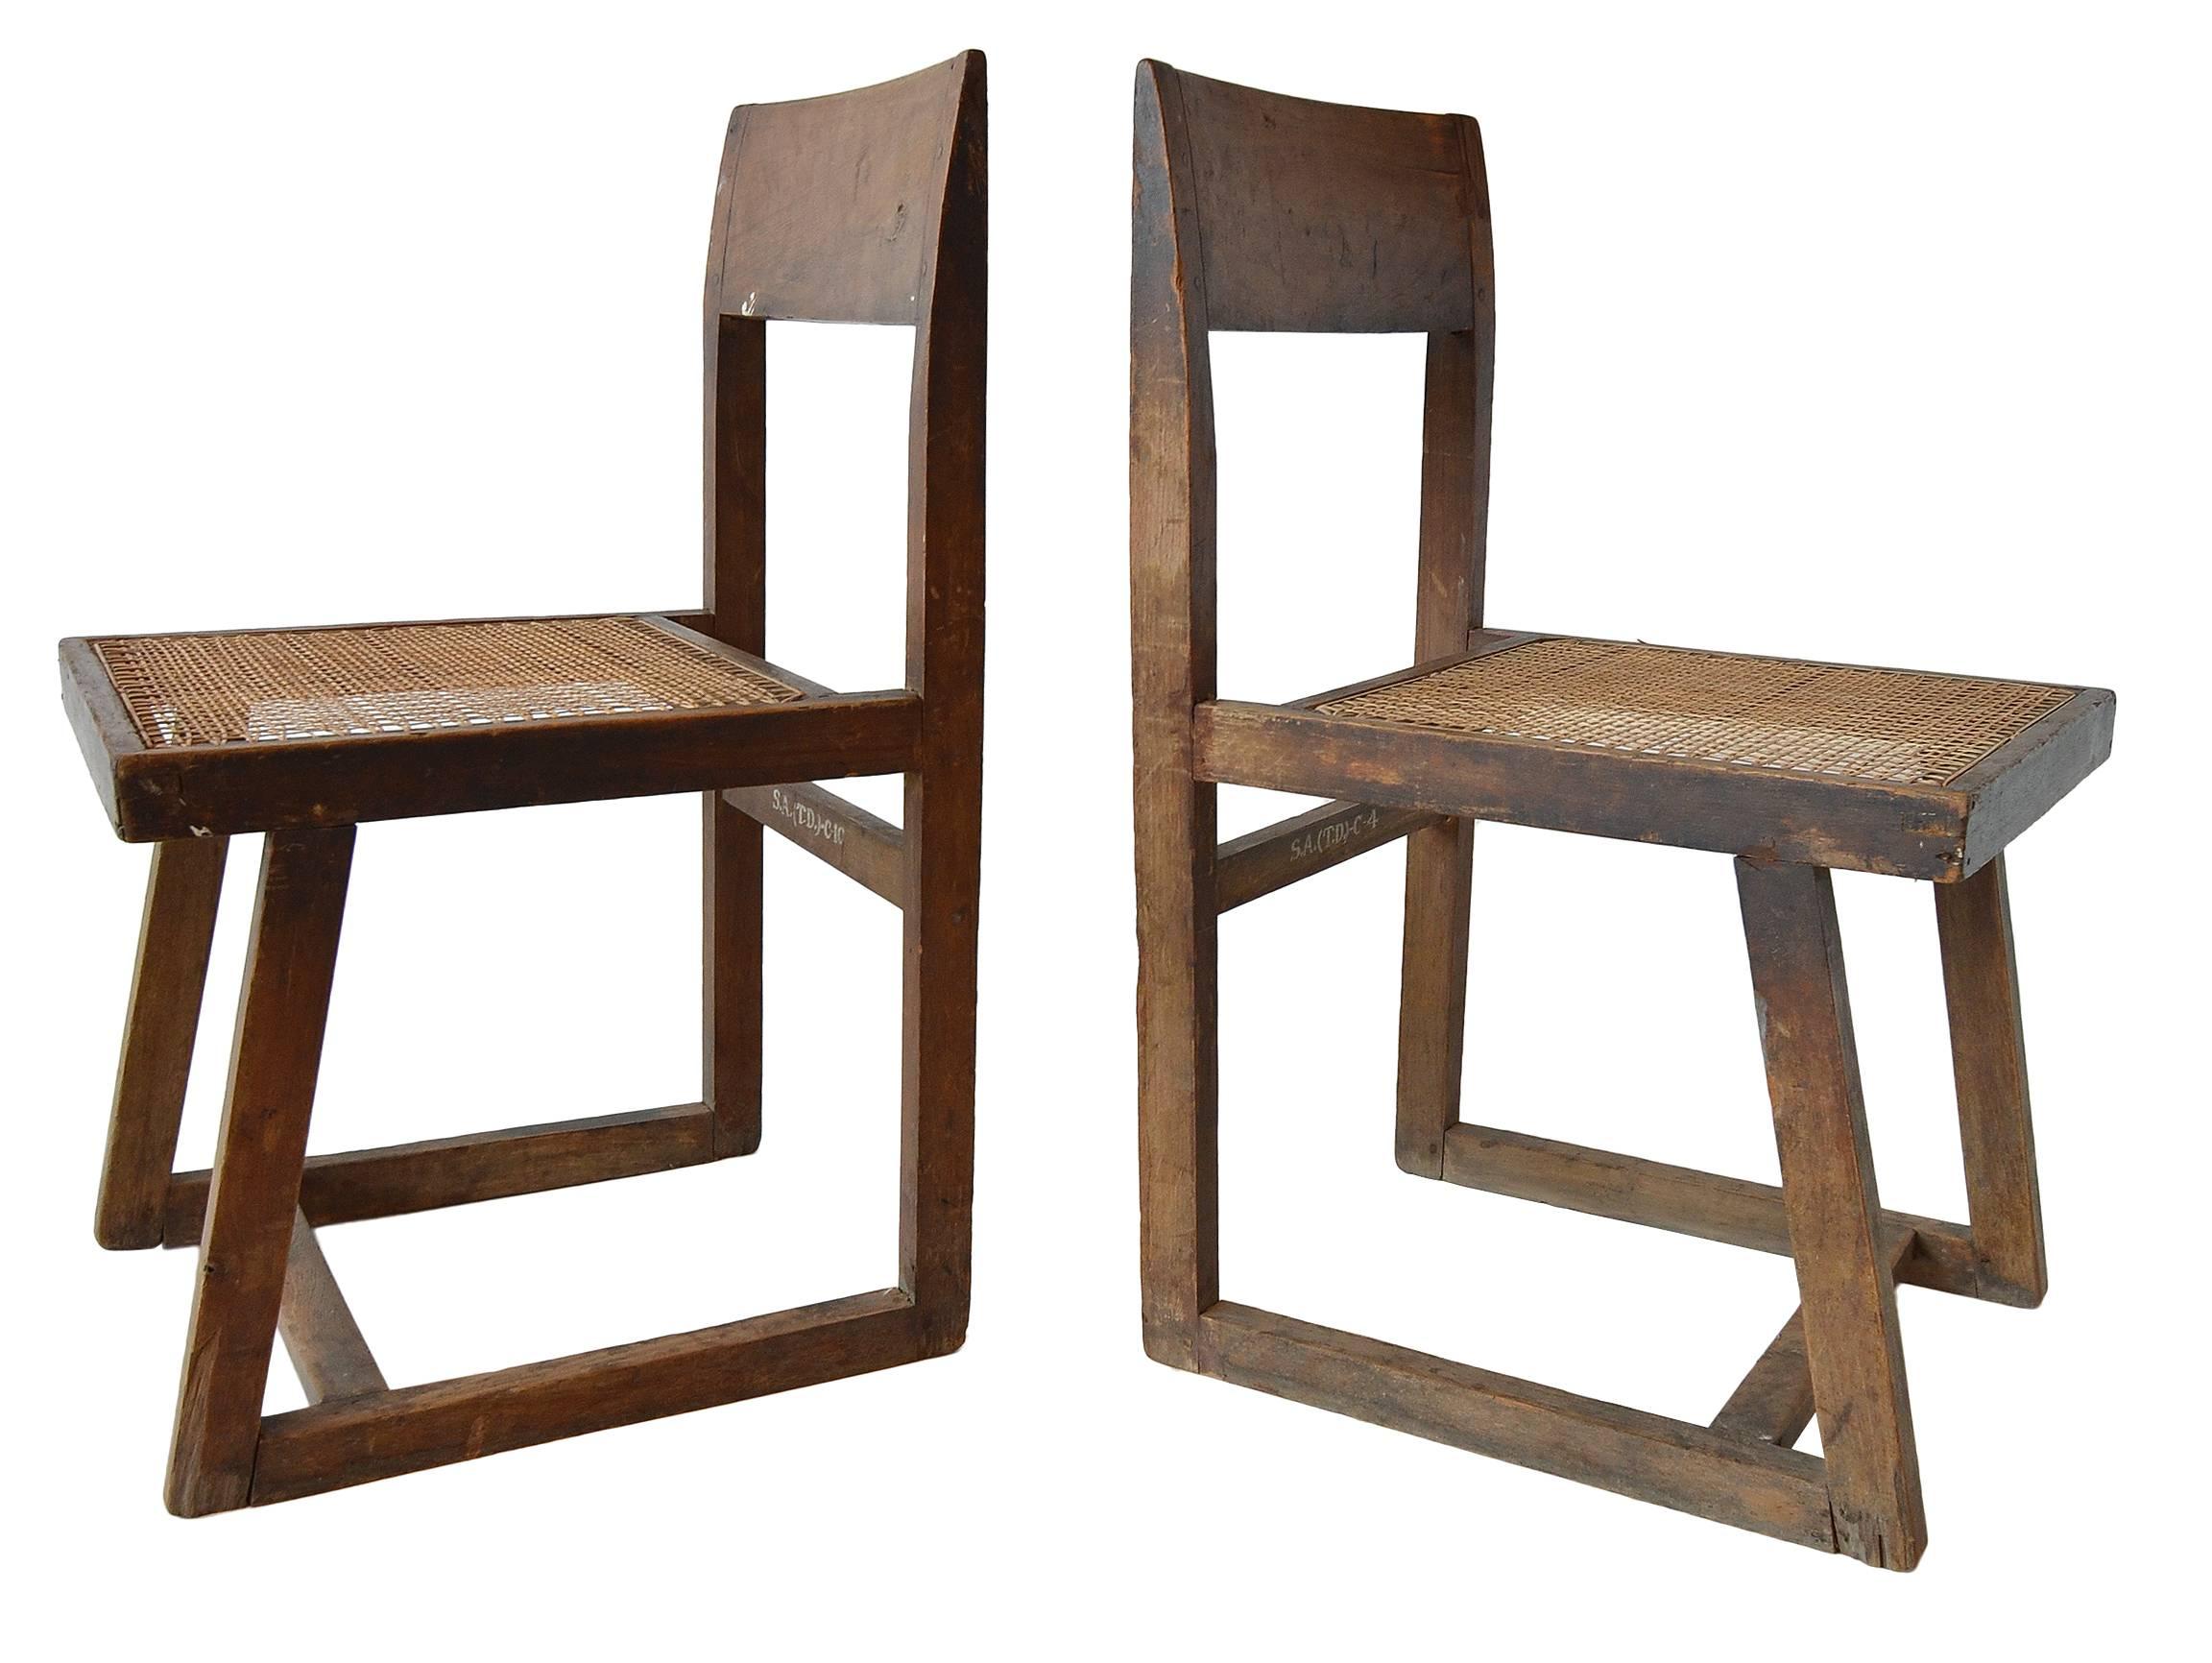 A terrific pair of library or side chairs by Pierre Jeannette for the Chandigarh project.
These two chairs are from the same building and are a nicely matched pair.
Very rare as only a few hundred of these were ever produced.
Originally situated